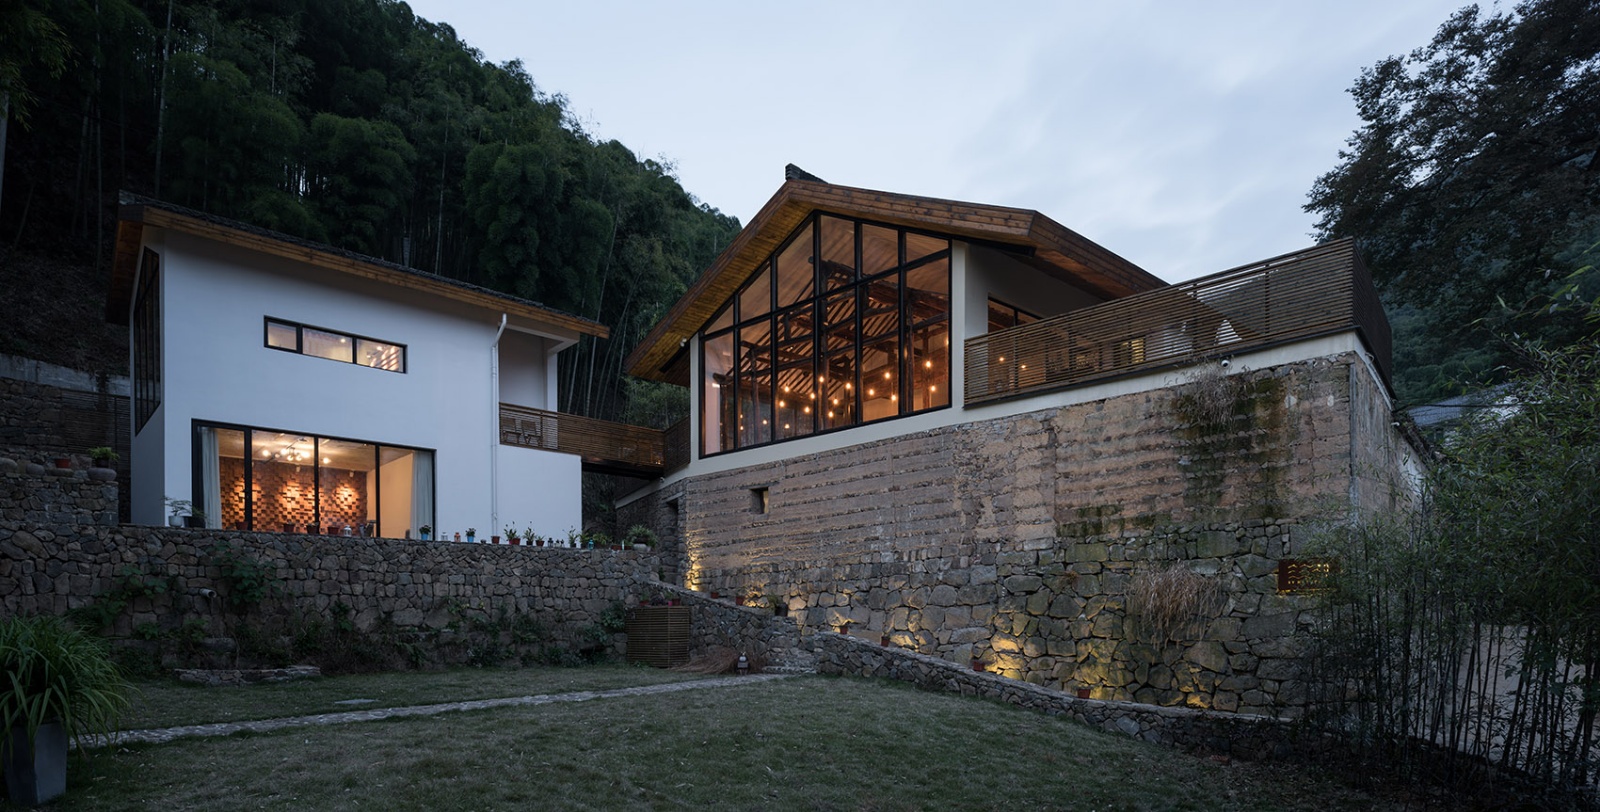 018-Half-House：Facing-a-wall-and-thinking-over-By-SU-Architects.jpg